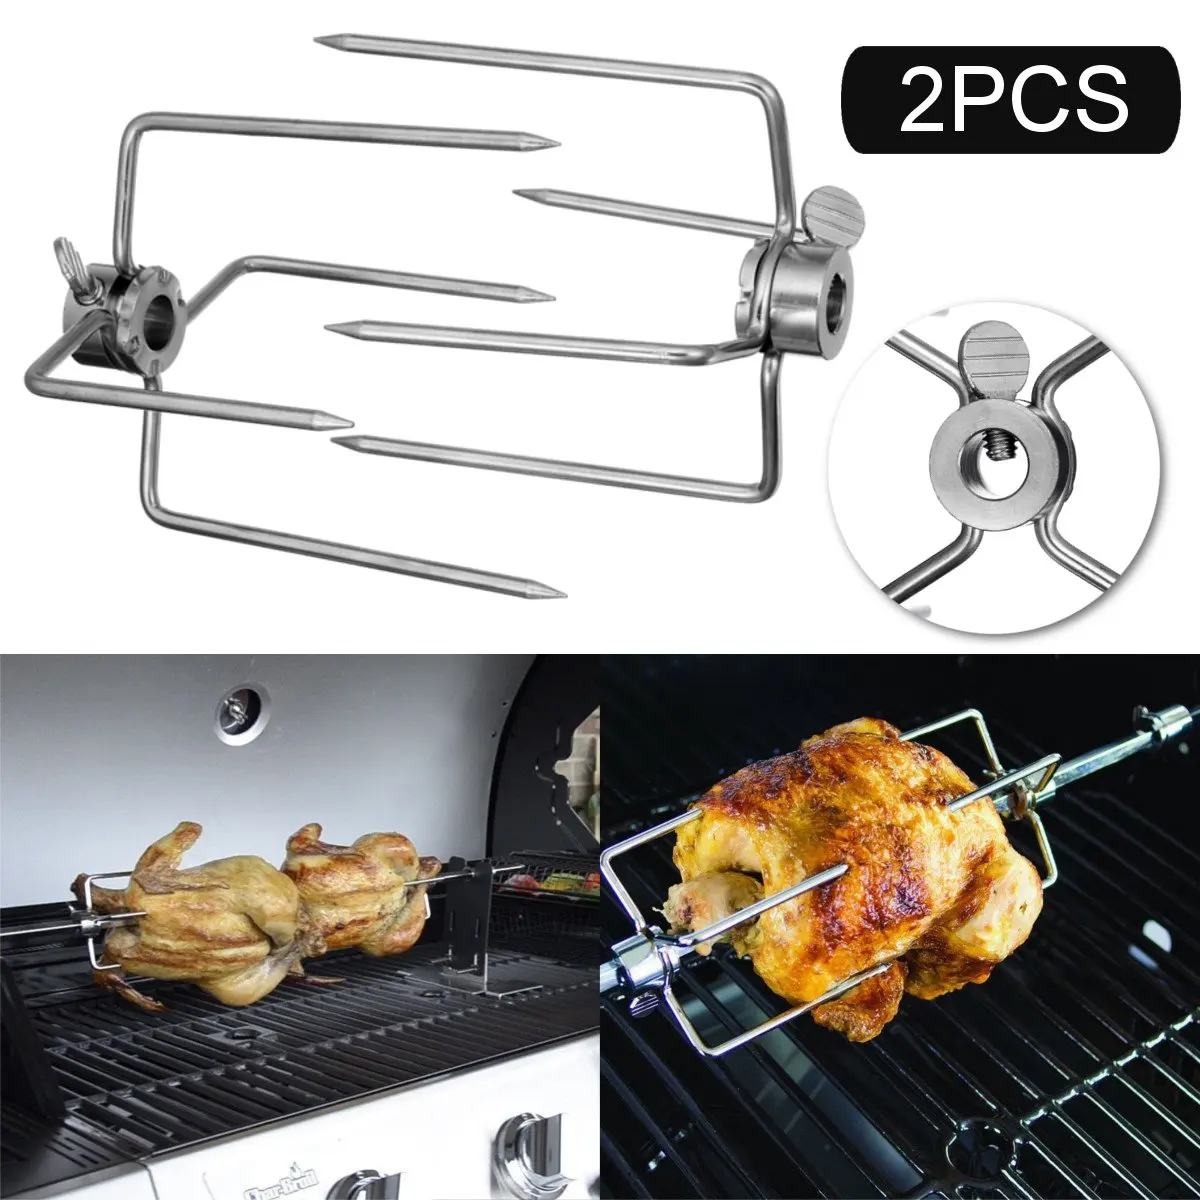 ROTISSERIE CHICKEN FORKS STAINLESS STEEL BBQ CHARCOAL GAS SPIT GRIPS PRONGS 2 